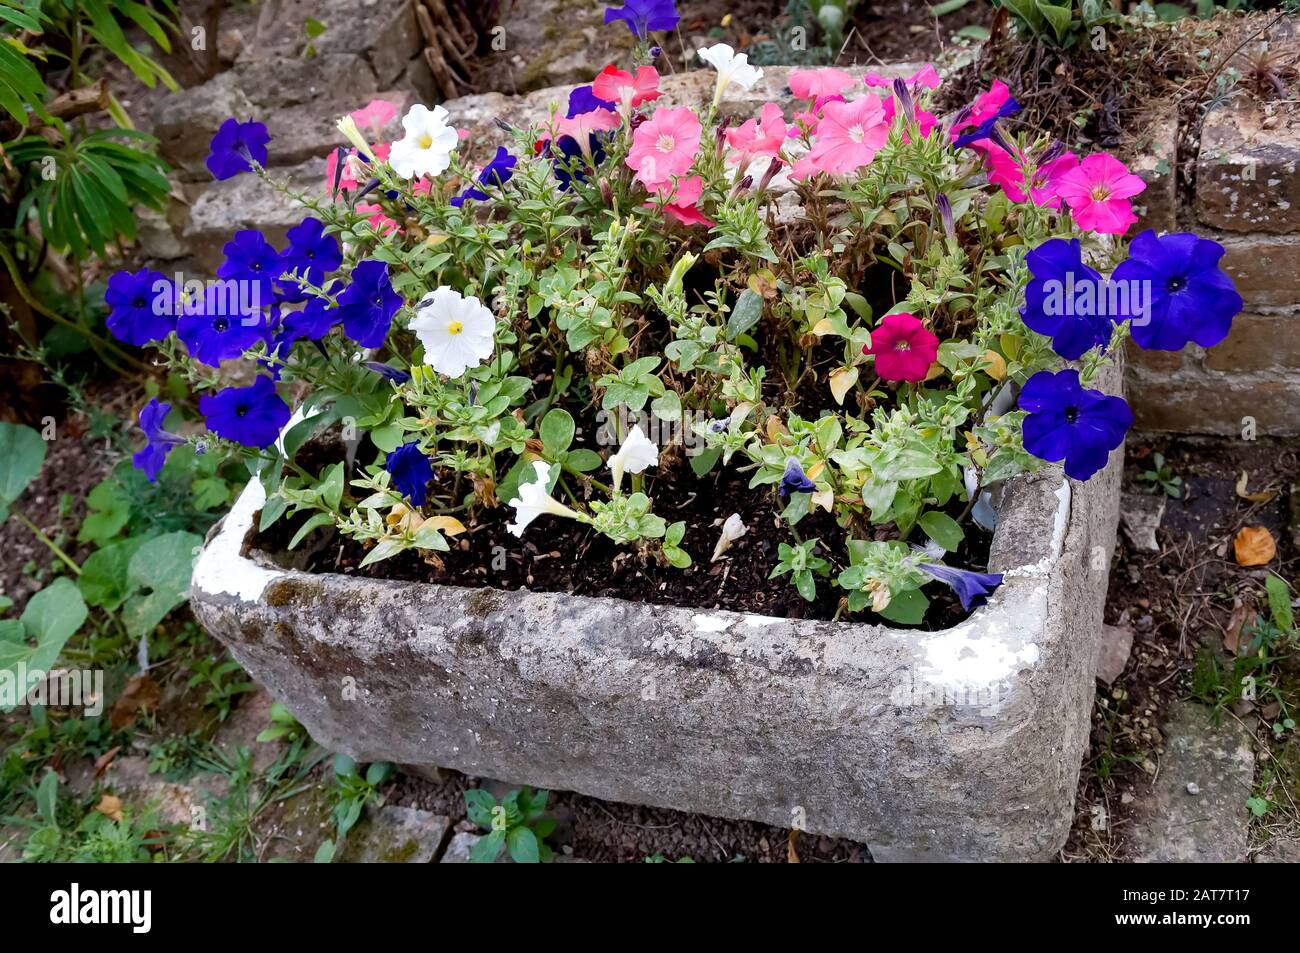 Petunia flowers growing in a very old and weathered butler sink. Stock Photo